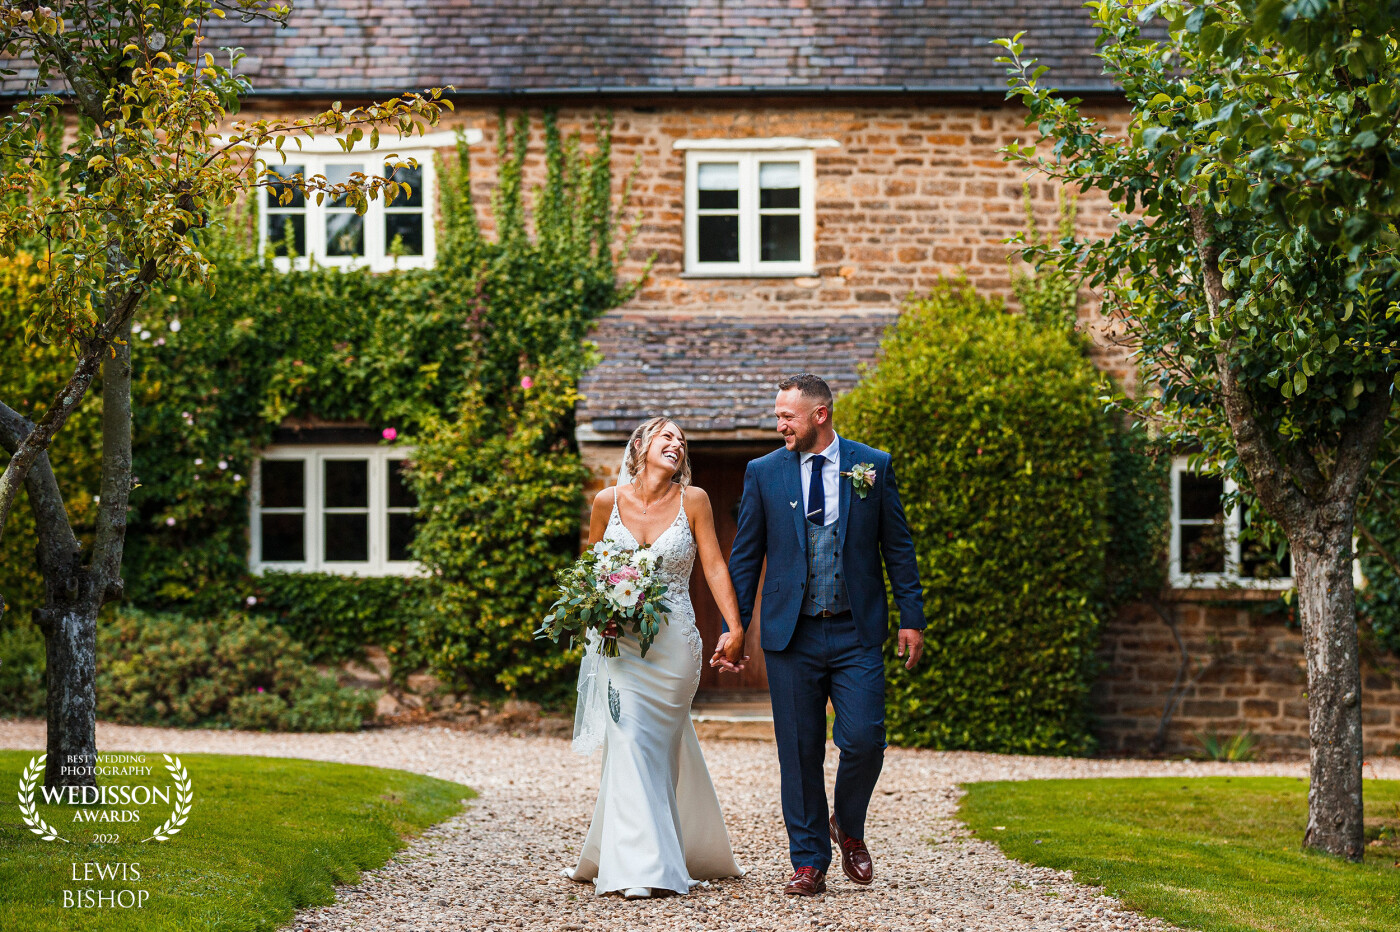 This was captured at a stunning venue by the name of Dodford Manor. Simply walking hand in hand, these two could not get enough of each other, and are clearly very much in Love!